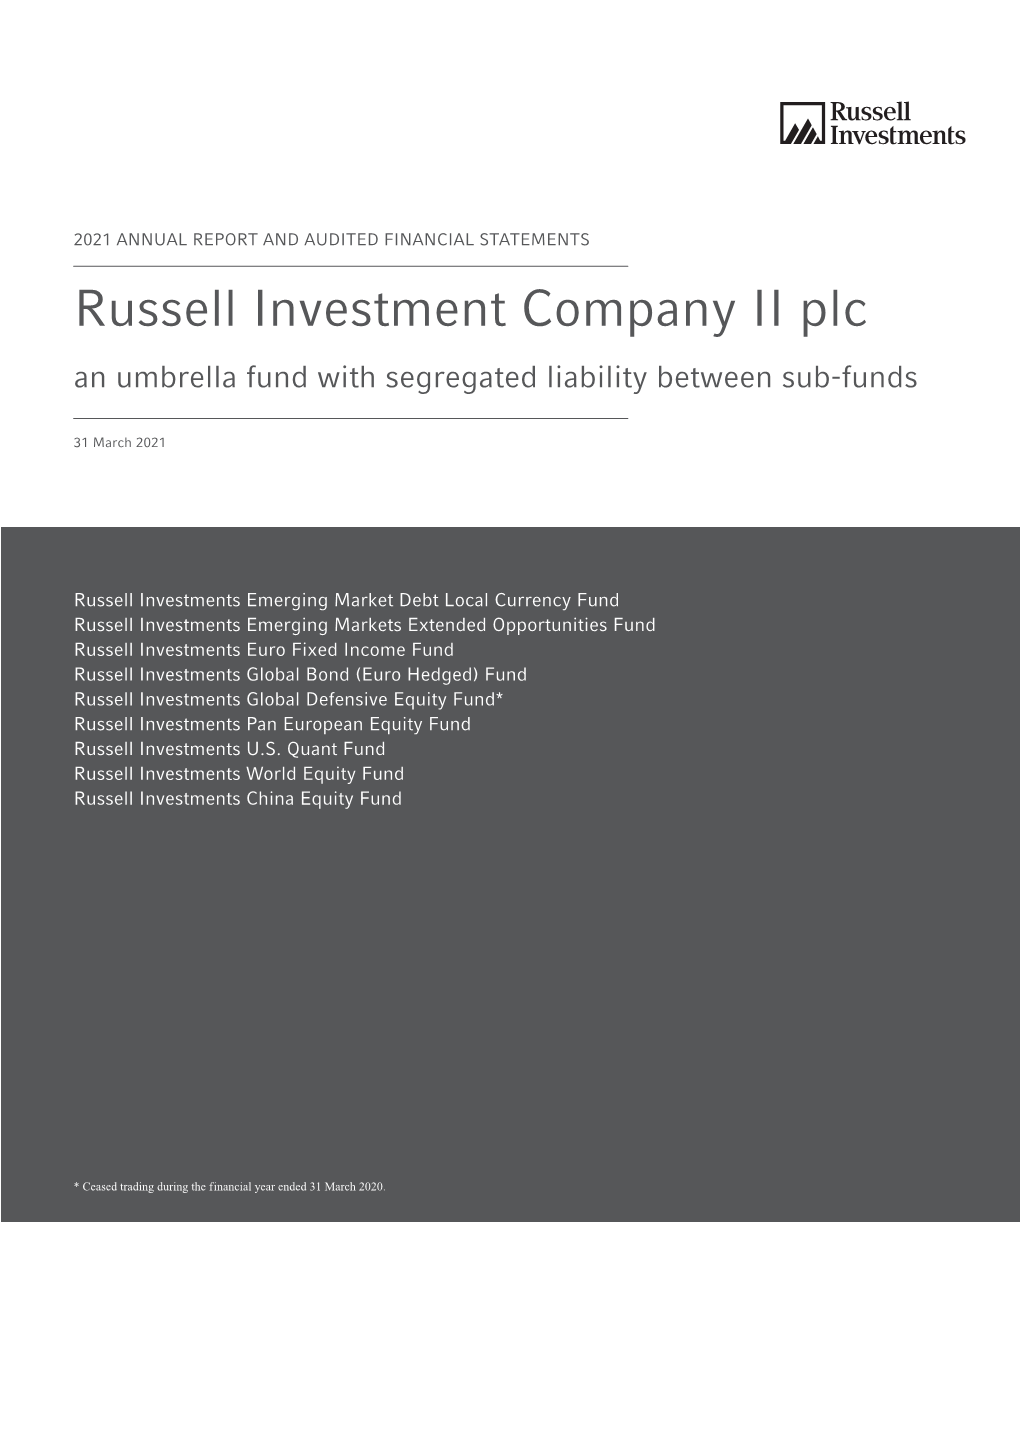 Russell Investment Company II Plc an Umbrella Fund with Segregated Liability Between Sub-Funds